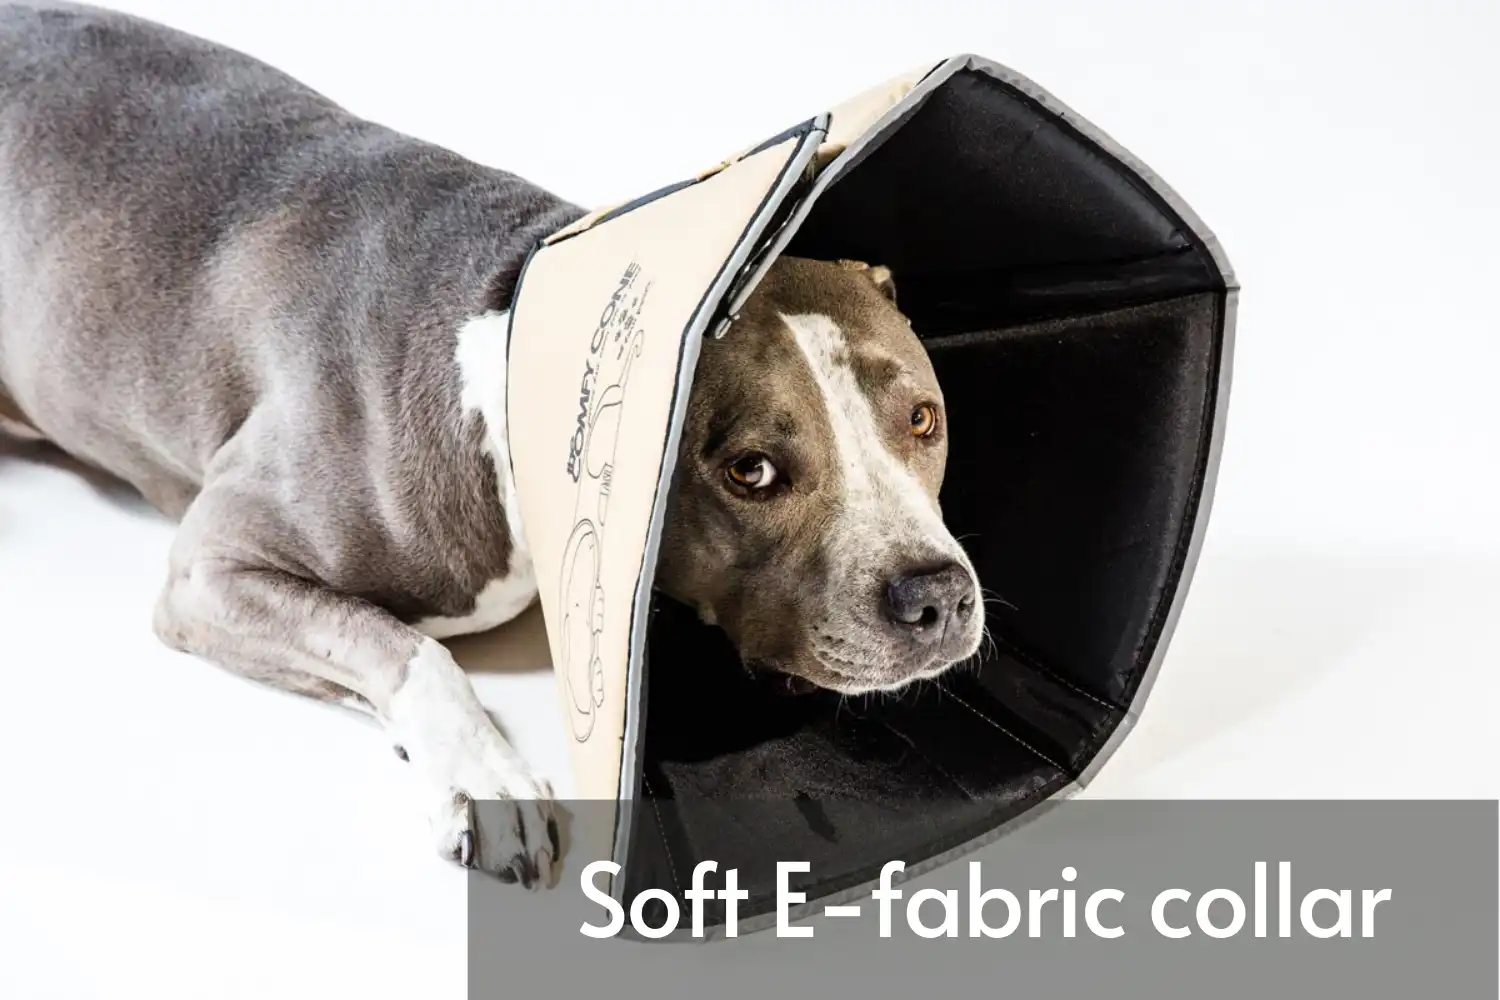 How Long Does Dog Wear Cone after Neuter? - Alternatives to the plastic cone - Soft E-fabric collar